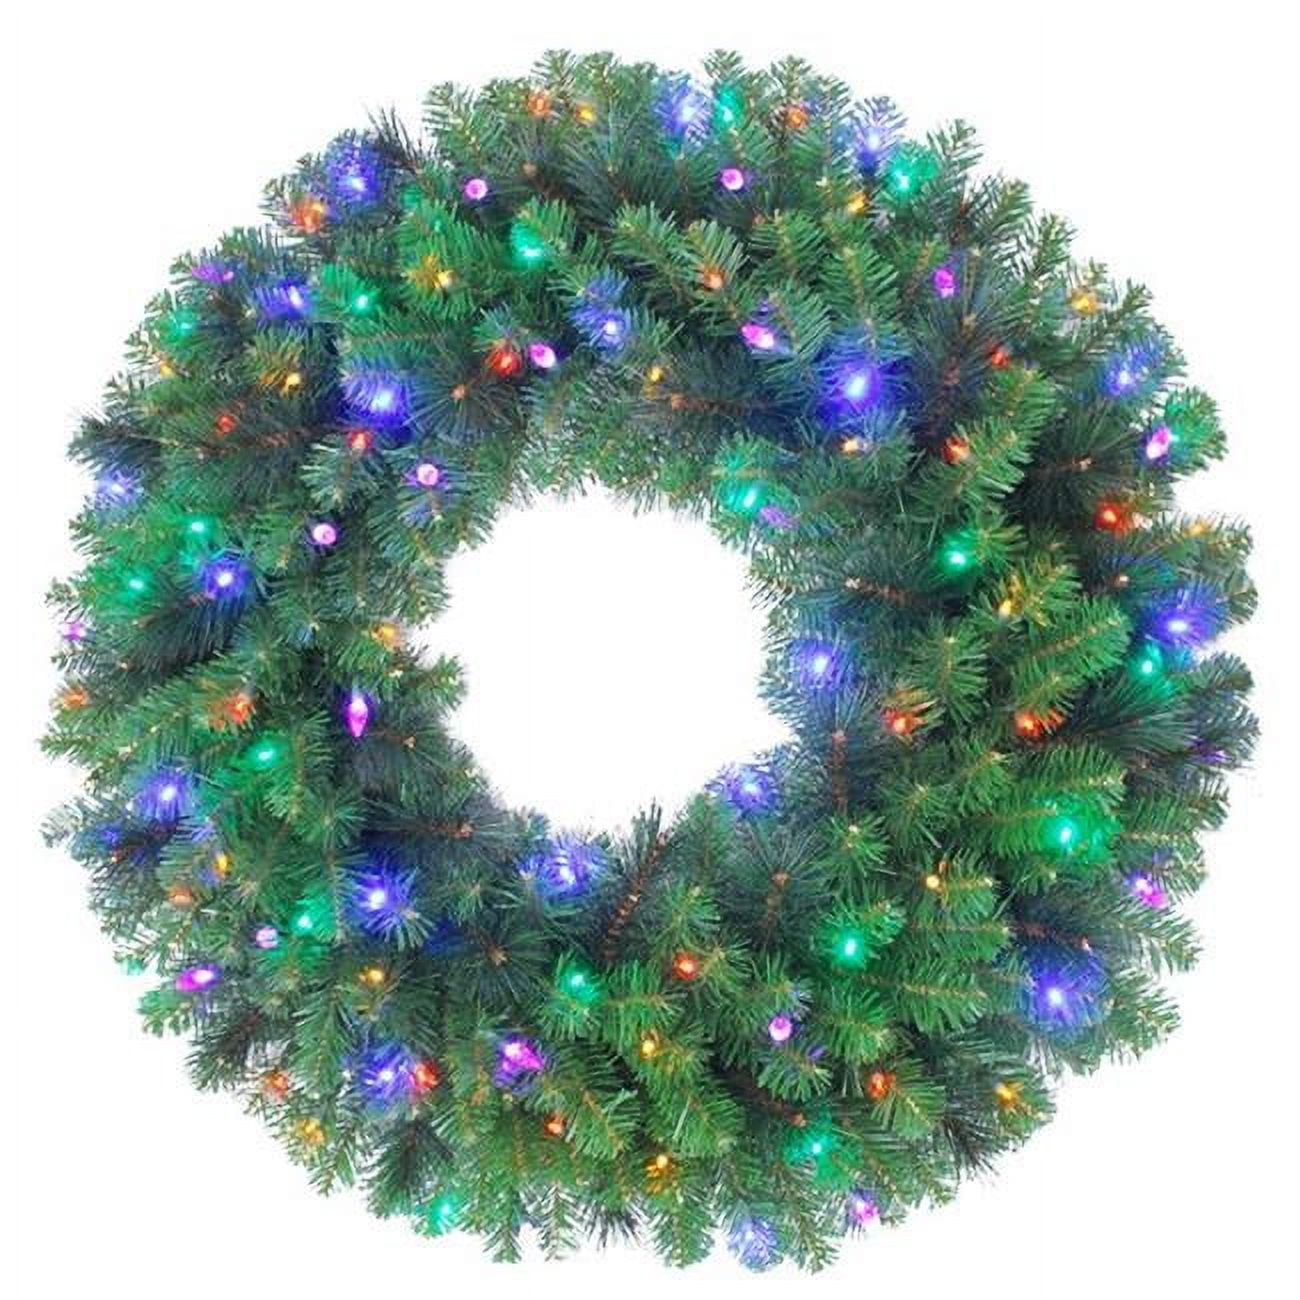 9016960 36 In. Dia. Mixed Pine Prelit Green Led Decorated Wreath, Multi Color - Case Of 2